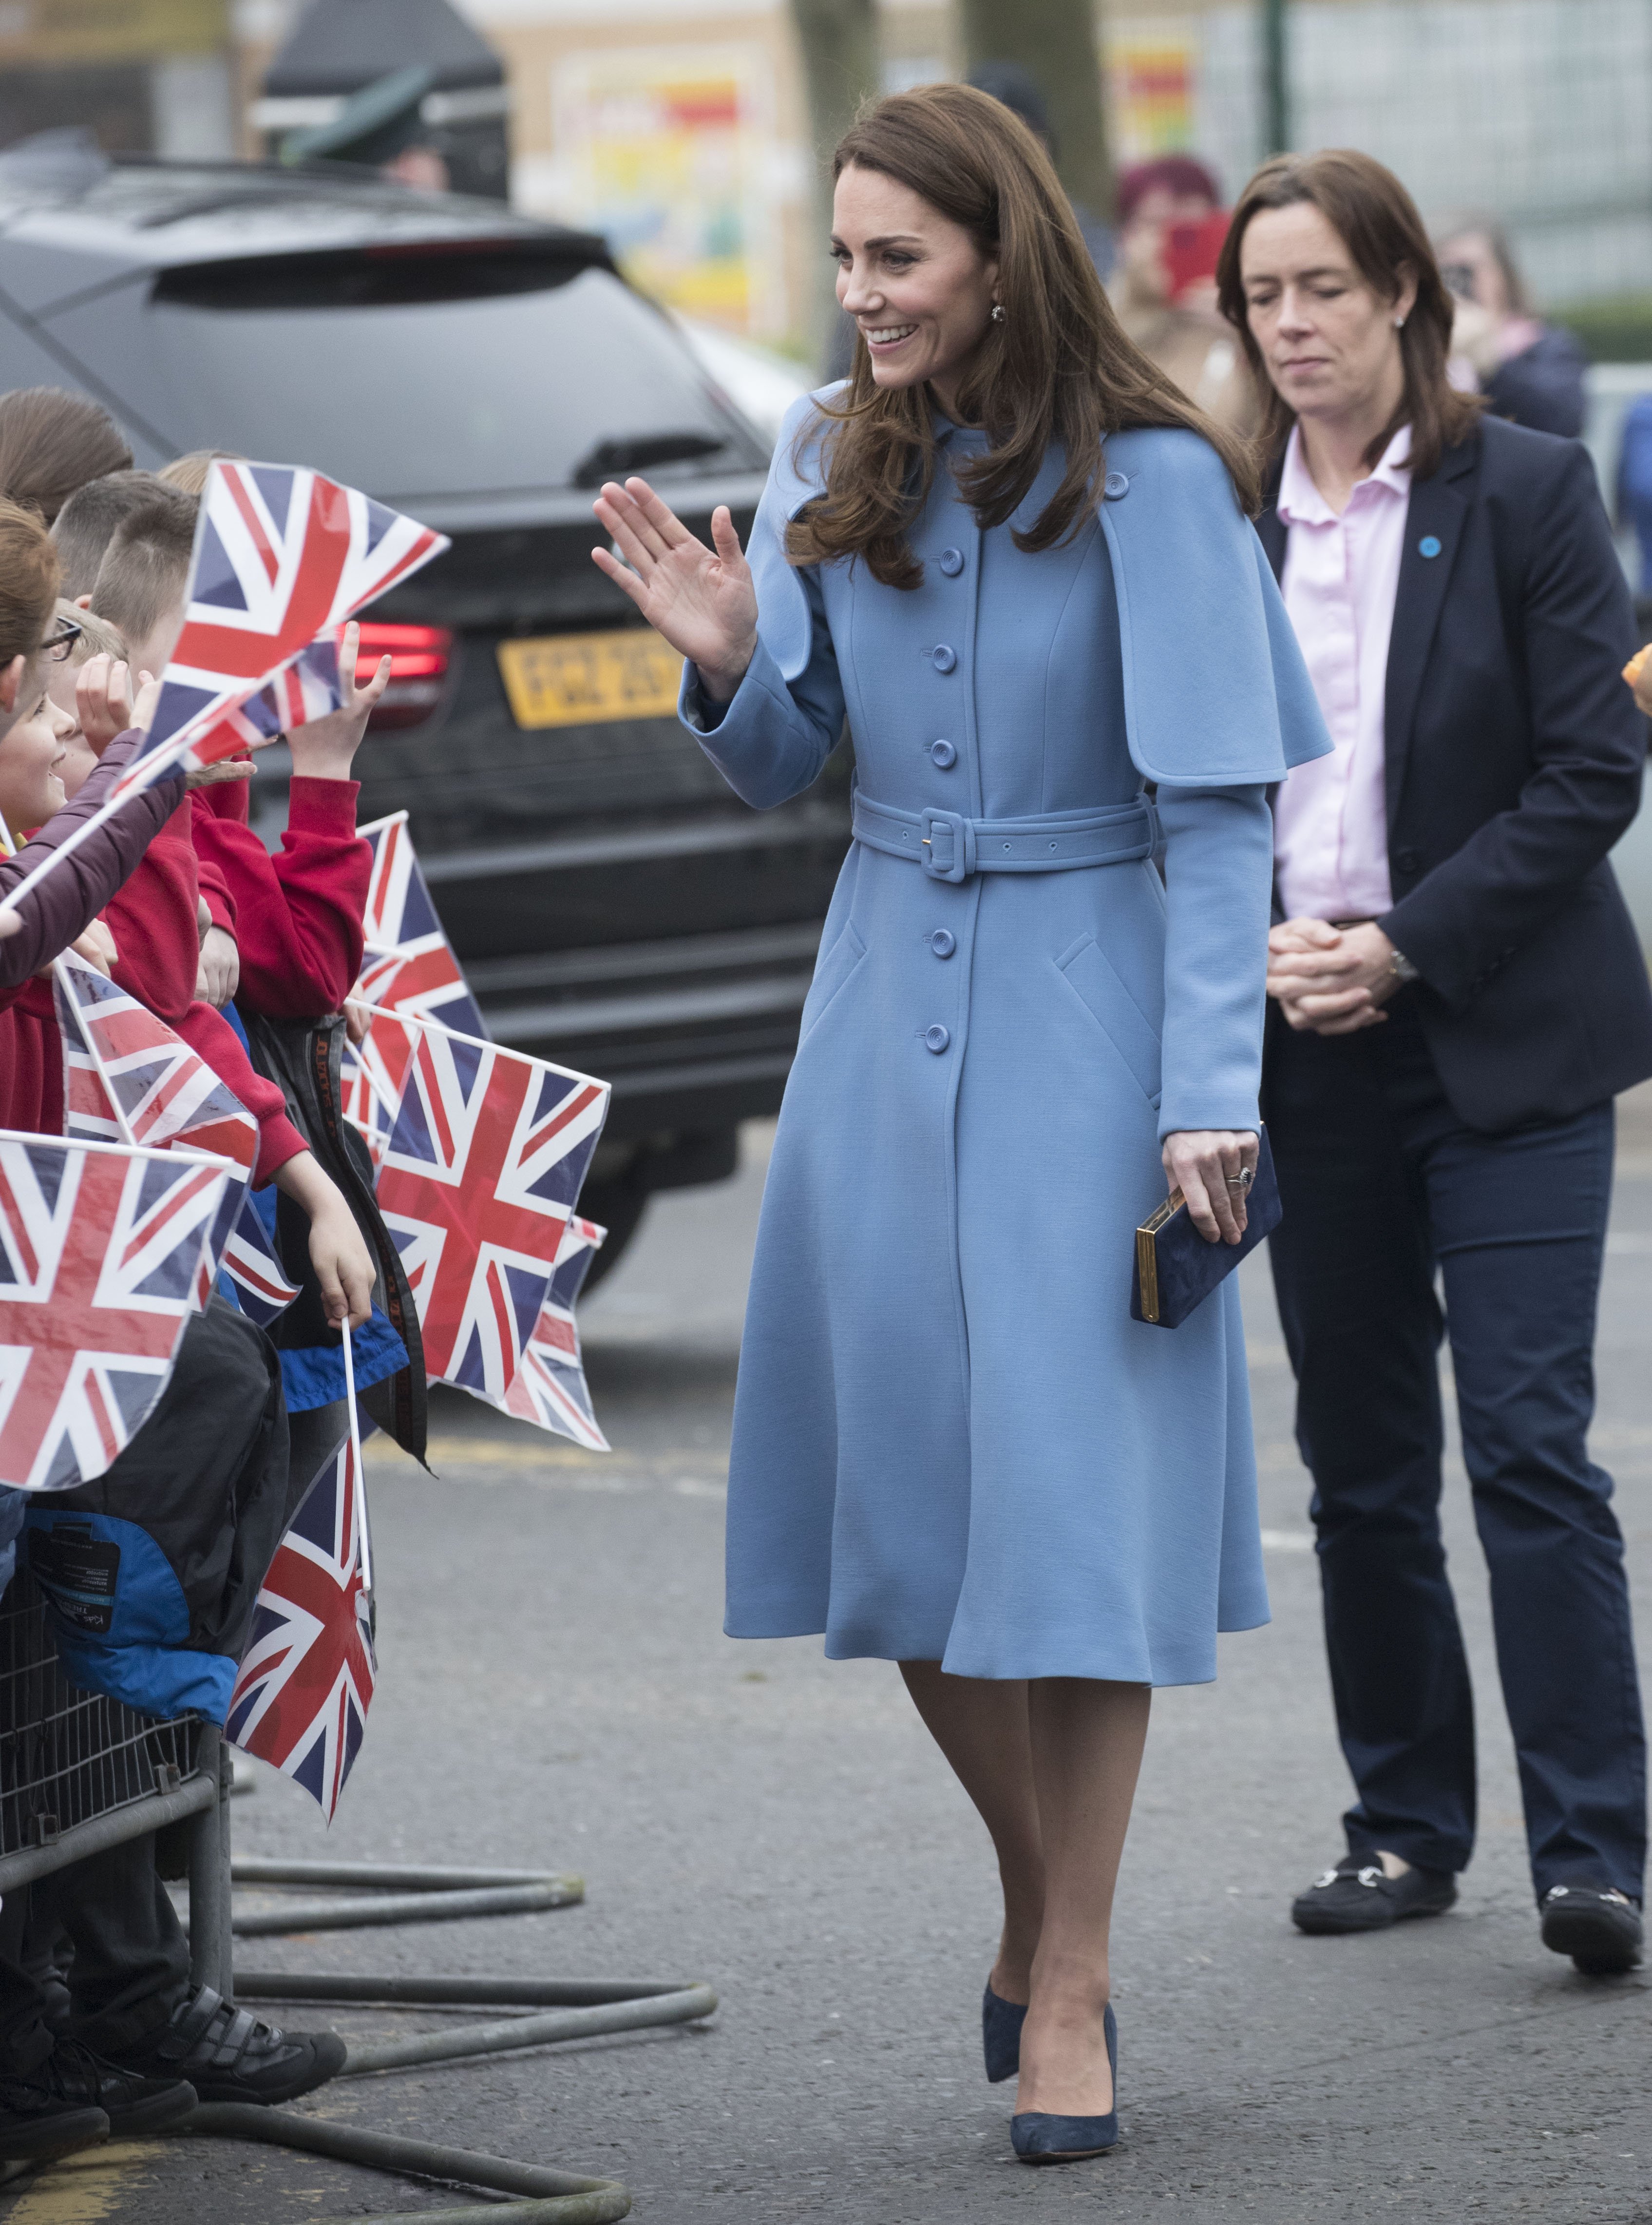 Kate Middleton, the Duchess of Cambridge, meeting well-wishers in Ballymena, Northern Ireland | Photo: Getty Images